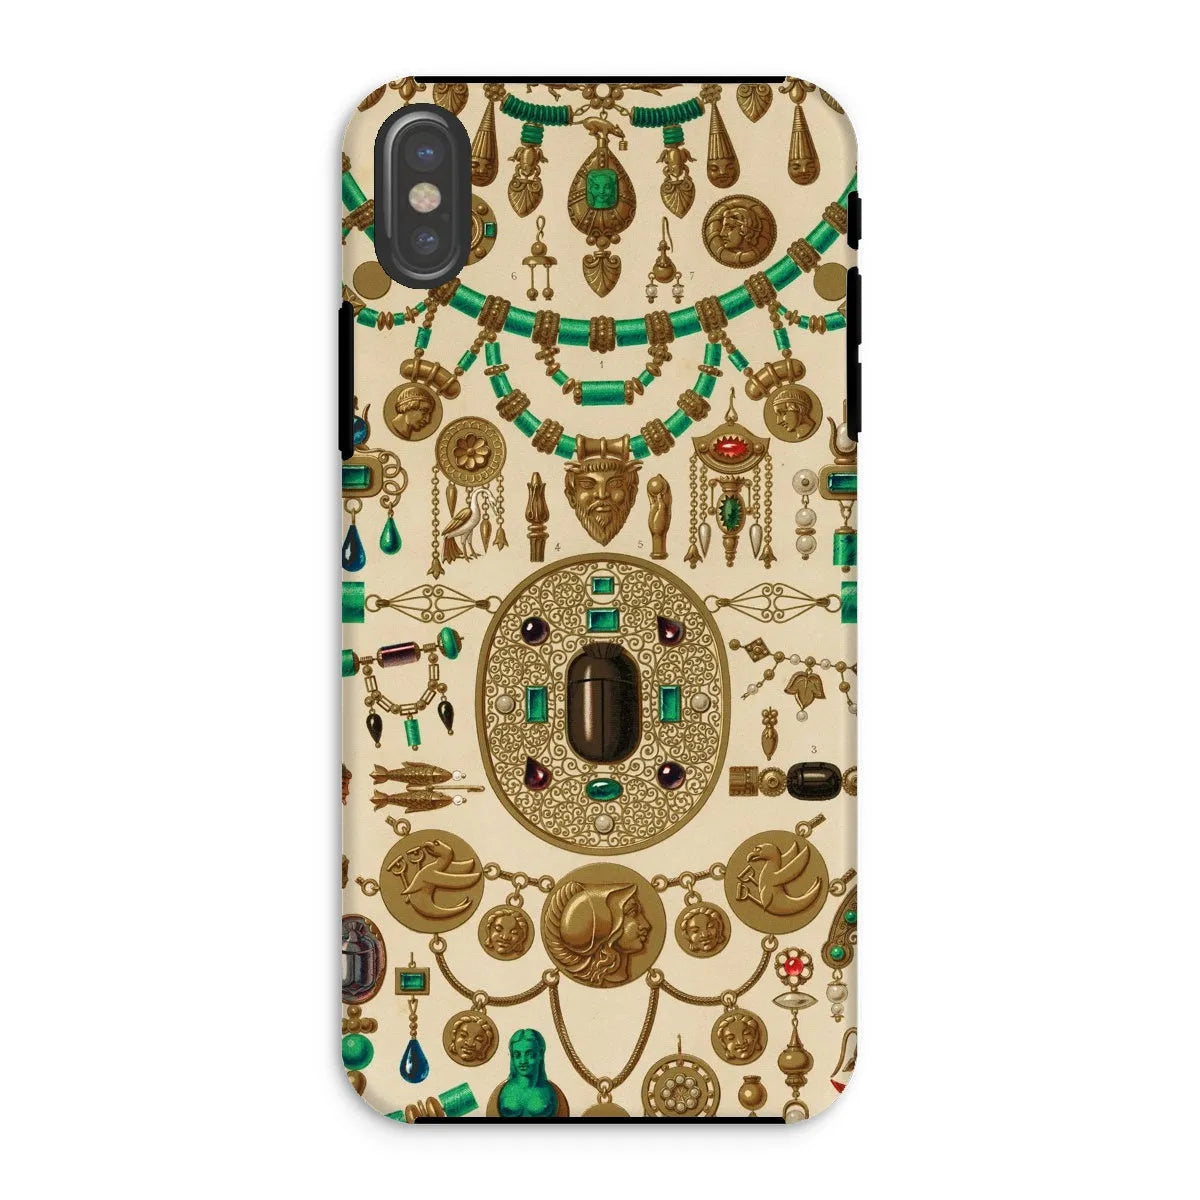 Etruscan Jewelry By Auguste Racinet Art Phone Case - Iphone Xs / Matte - Mobile Phone Cases - Aesthetic Art